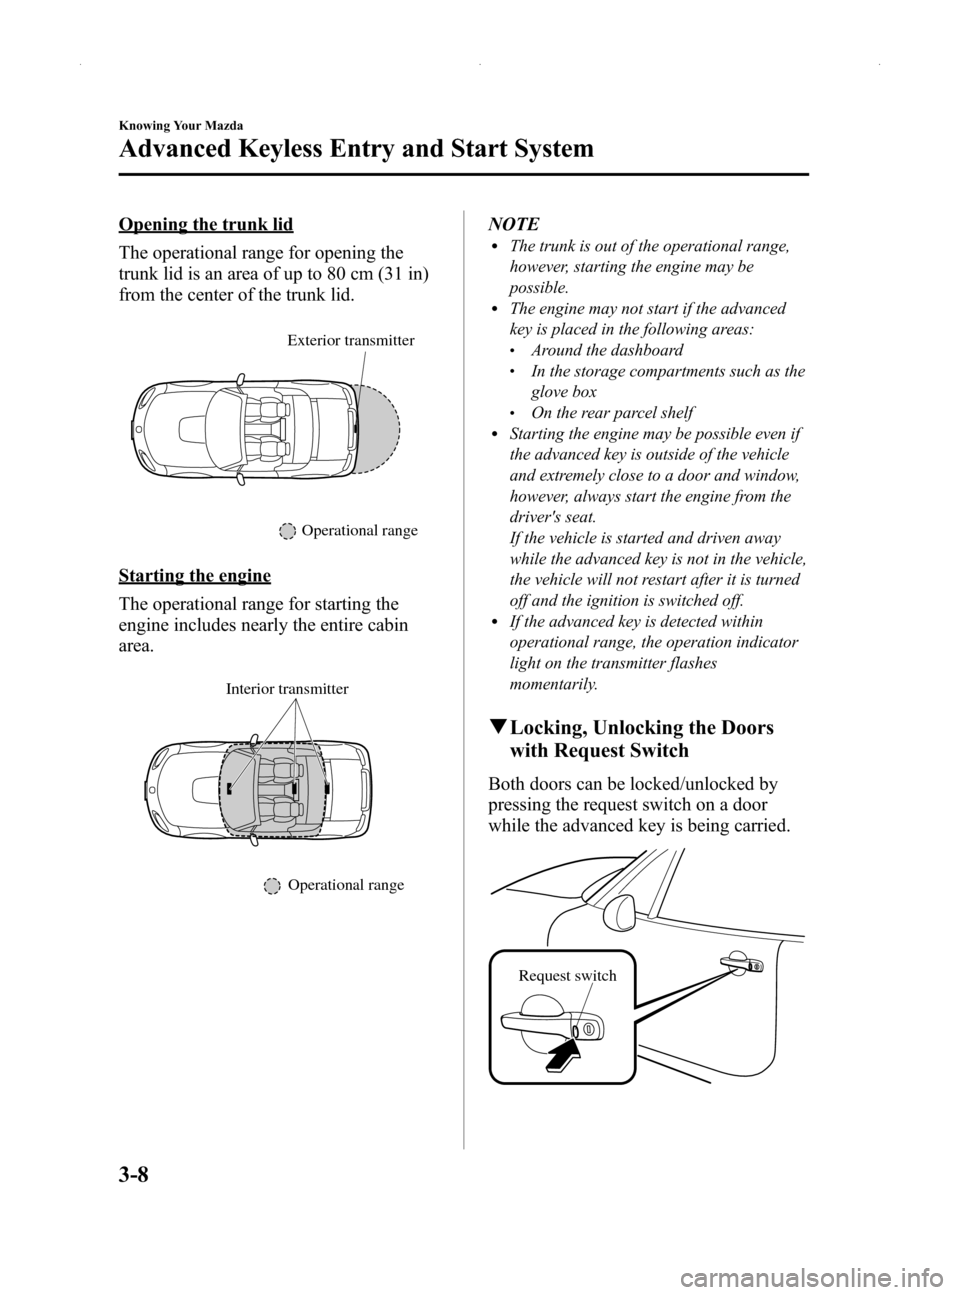 MAZDA MODEL MX-5 2014  Owners Manual (in English) Black plate (62,1)
Opening the trunk lid
The operational range for opening the
trunk lid is an area of up to 80 cm (31 in)
from the center of the trunk lid.
Exterior transmitter
Operational range
Star